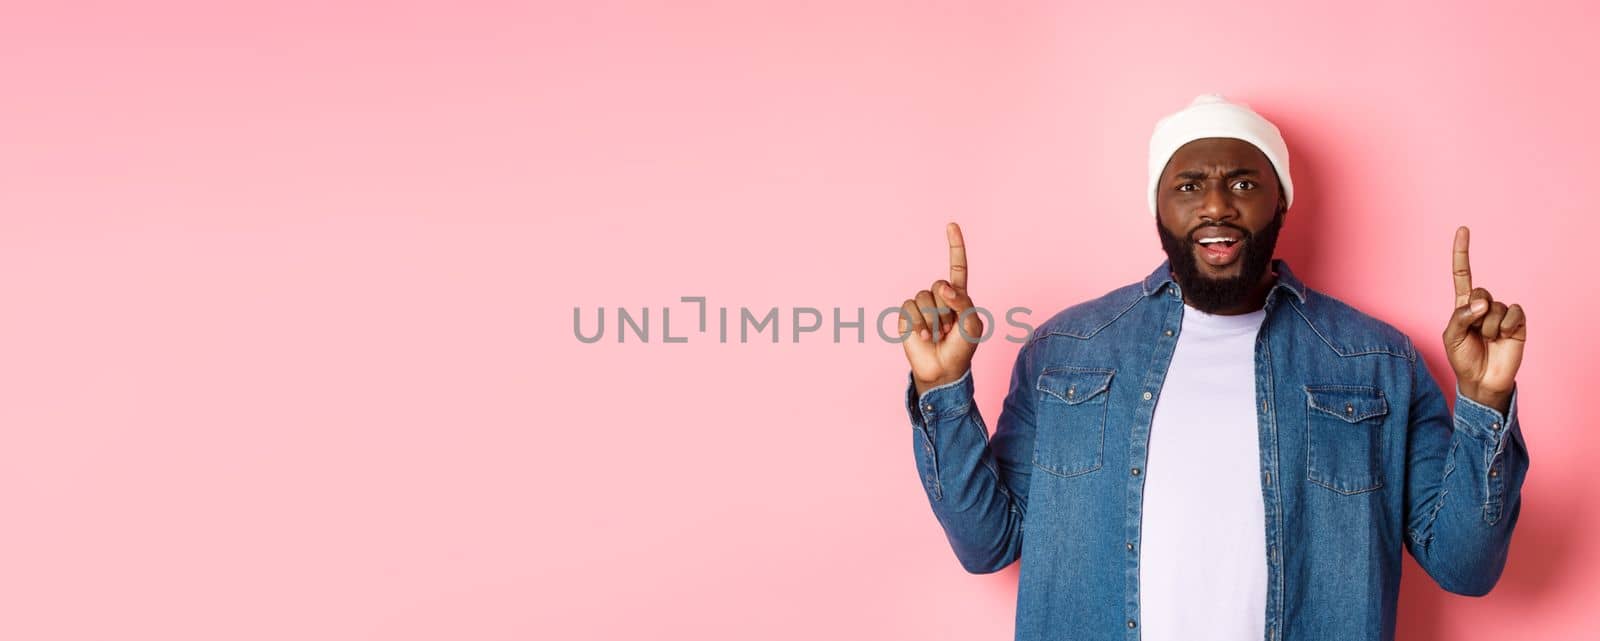 Disappointed and upset Black man frowning, pointing fingers up and staring at camera bothered, complaining at something, standing over pink background.